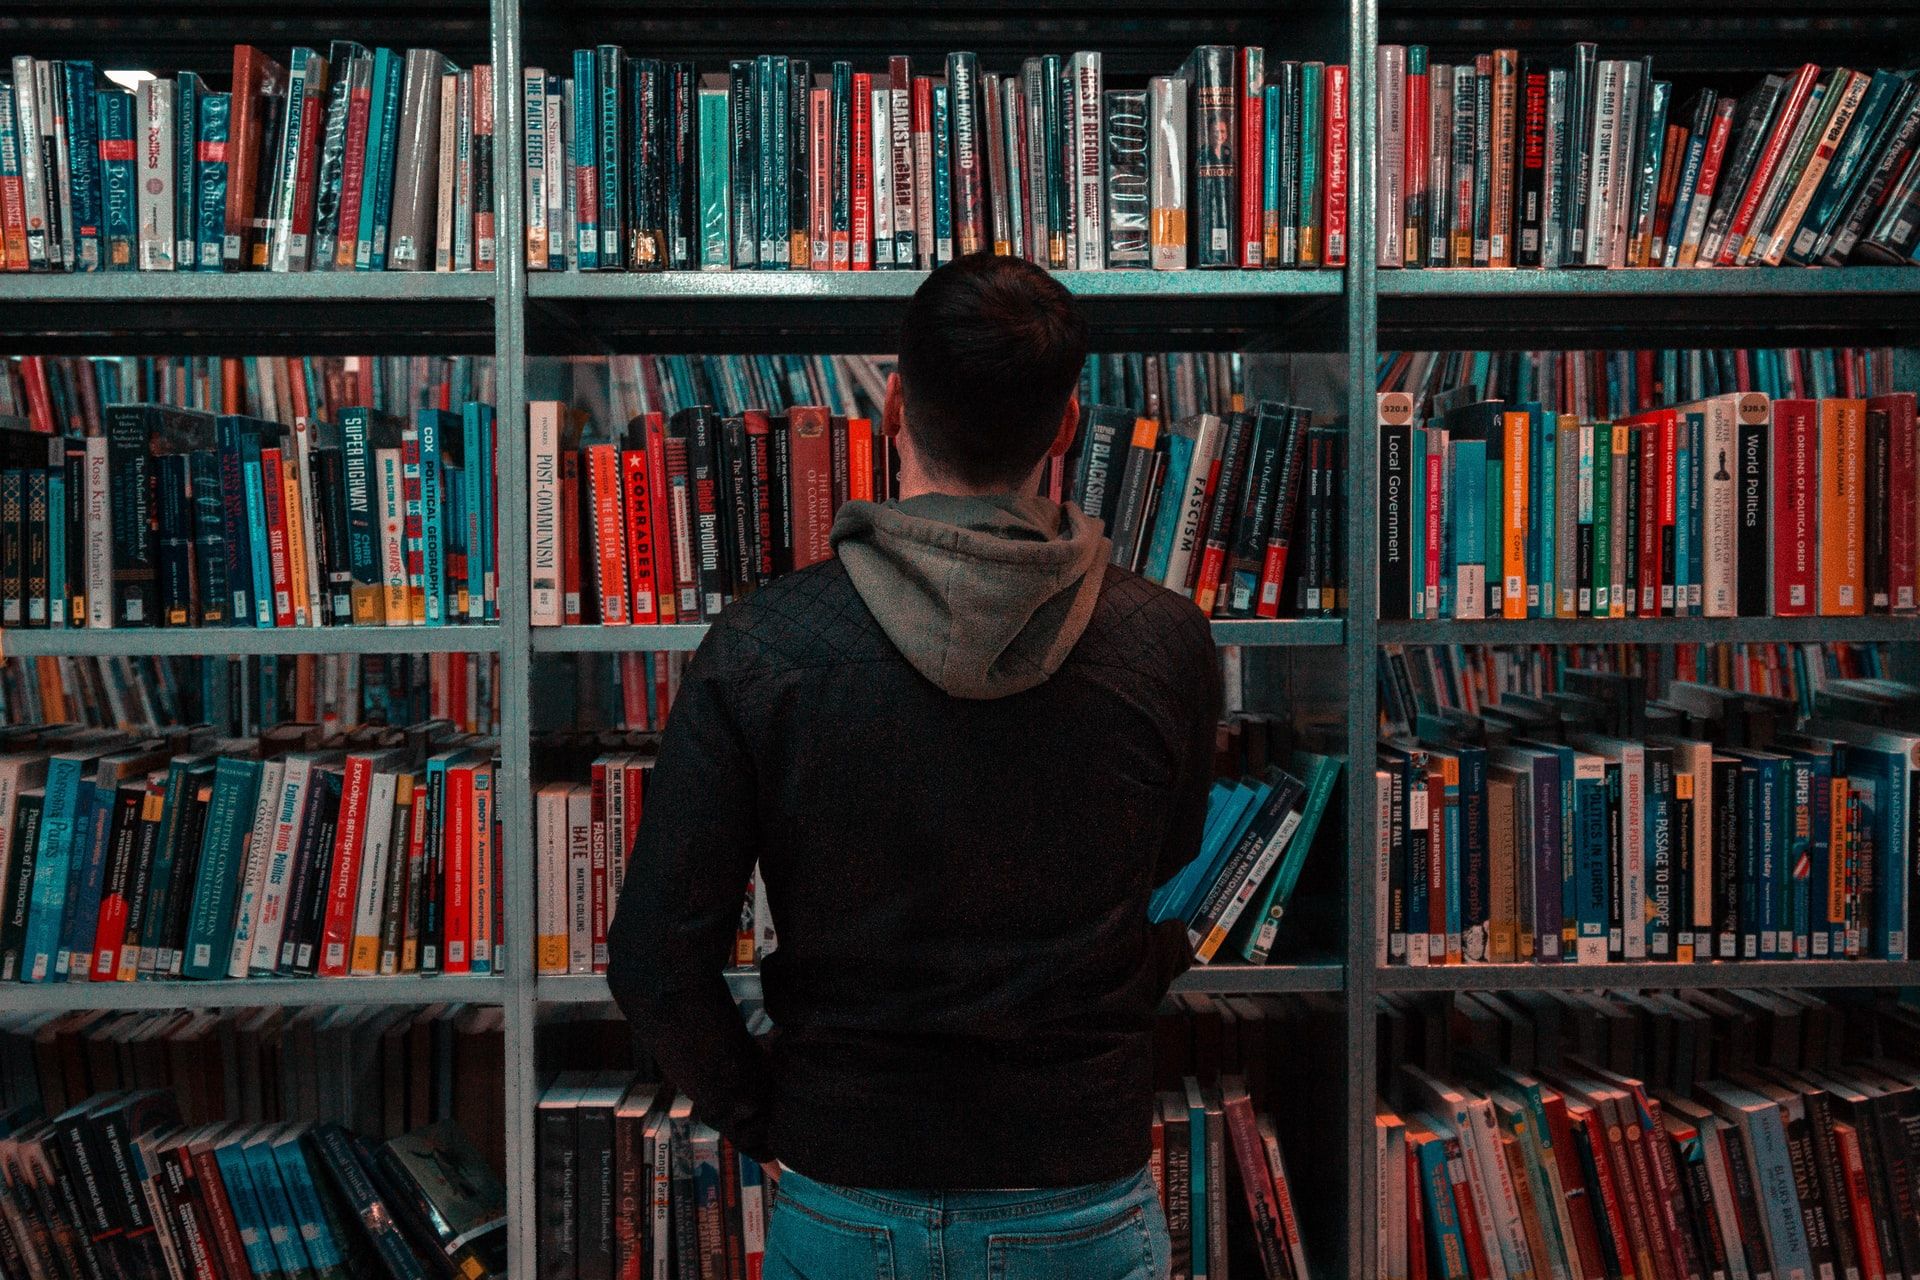 A person looking at a shelf of books in a library